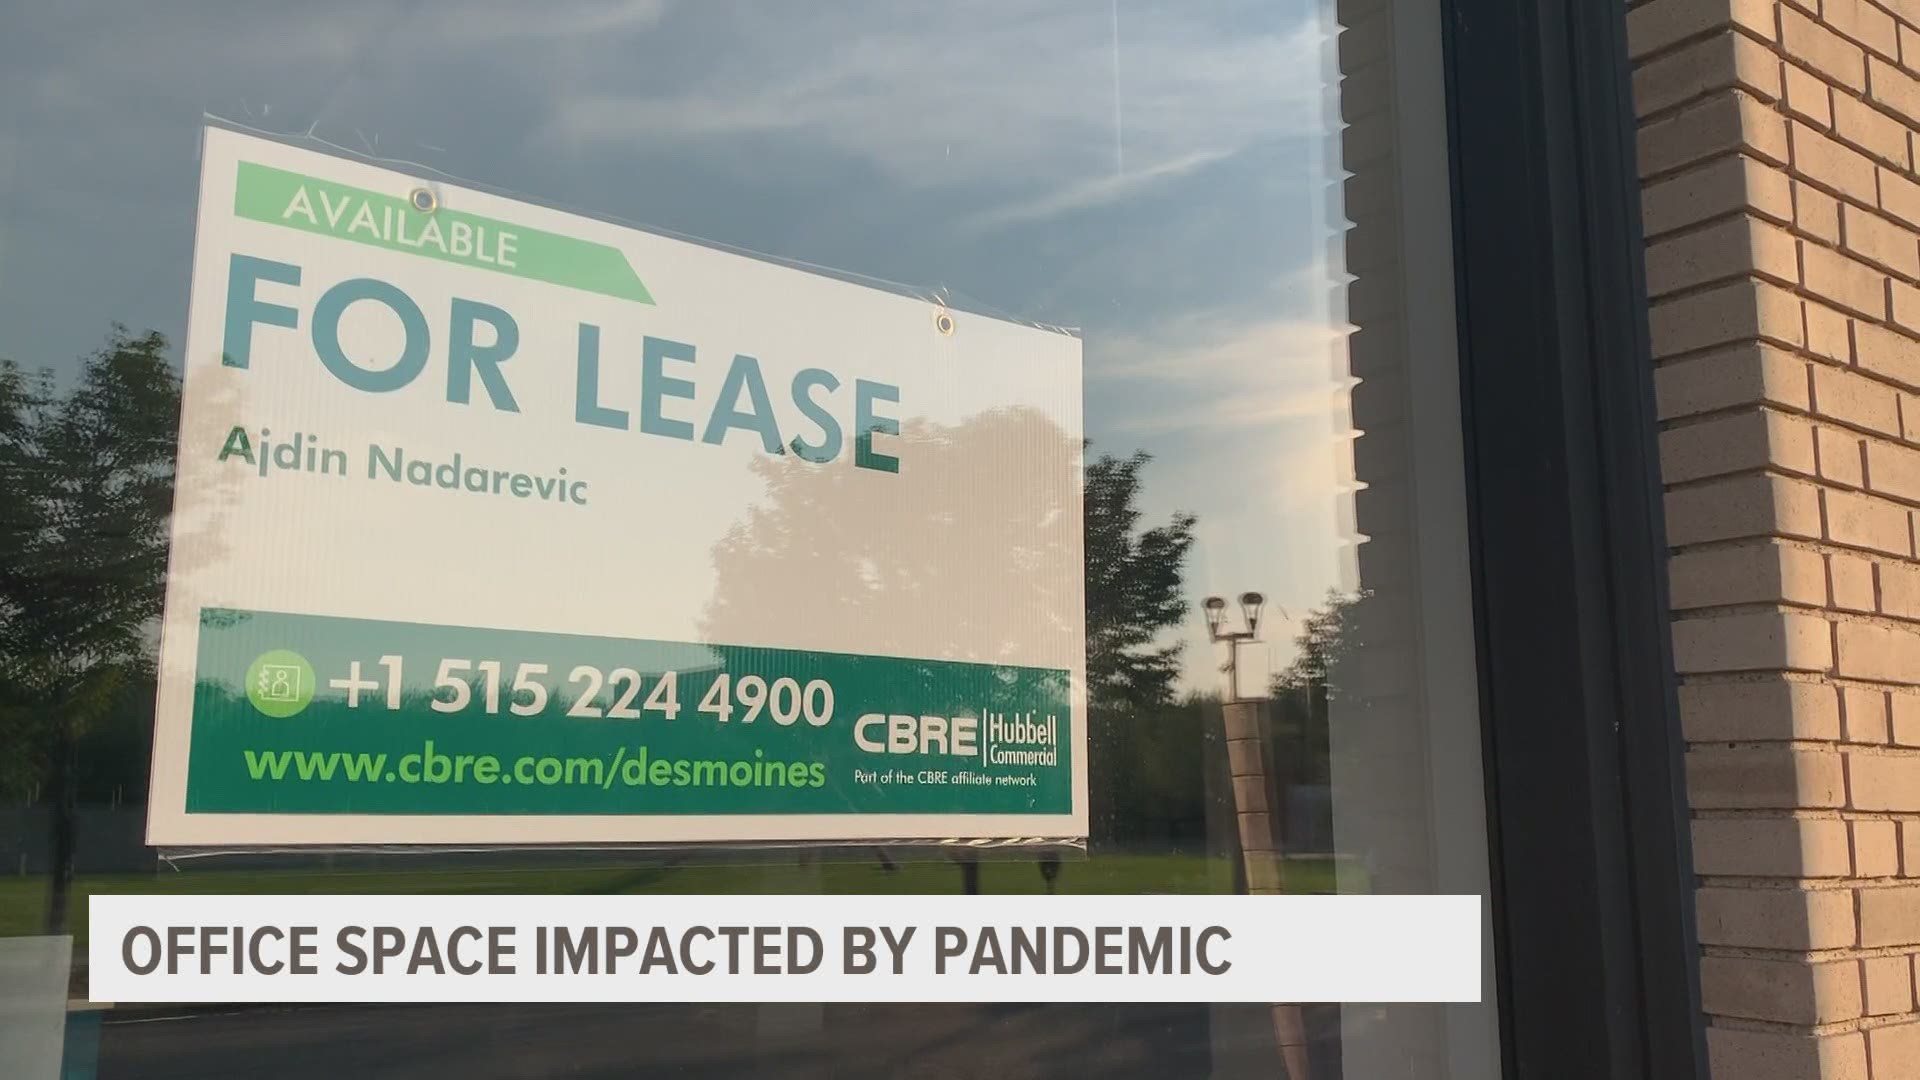 Office vacancies are on the rise in central Iowa. Industry experts blame the COVID-19 pandemic for hitting the pause button on new leases.